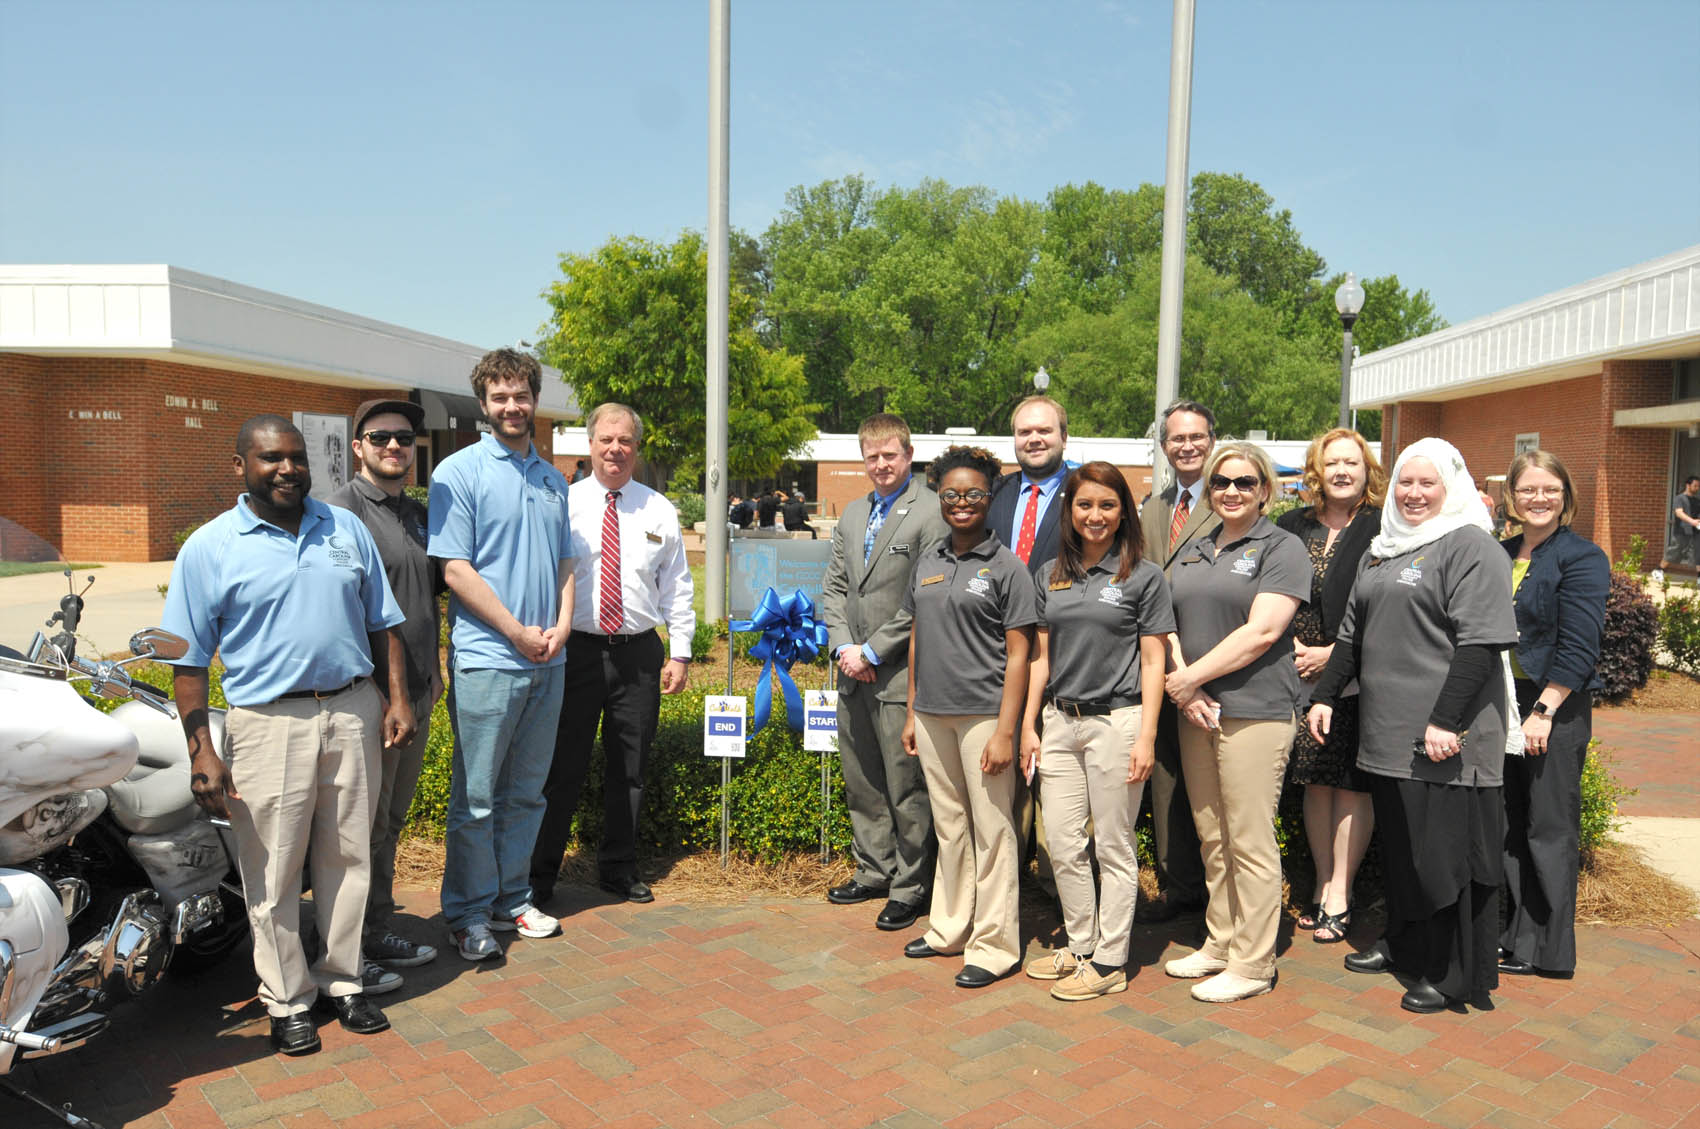 Click to enlarge,  Central Carolina Community College administrative and student leaders assembled on Wednesday, April 20, for the dedication of the new CCCC Cat Walk. The Cat Walk is a one-mile walking trail throughout the CCCC Lee County Campus. Each summer, the CCCC Student Ambassadors participate in a leadership development and team building class. The 2015-2016 Ambassadors wanted their project to benefit the entire campus community, and decided that this year's project would be to design, implement, and maintain a walking trail at the Lee Campus. Students who participate in physical education classes will be able to utilize the trail as well. The trail begins near the flagpoles, where a large map of the trail is located. The trail is a little less than a mile, and is marked by signs with the Cat Walk insignia on them that identify the  -mile and  - mile marks, trail direction, and start/end points. Each sign has a QR code that can be scanned with a smartphone, which shows a map of the trail. Student Ambassadors are Megan Blair, Cris Contreras, Christian George, Chriss Harvin, Landis Johnson, Aaron Kovasckitz, Lacey Kuenzler, Rolander Mayo, David Pope III, and Sarah Shannon-Mohamed. 